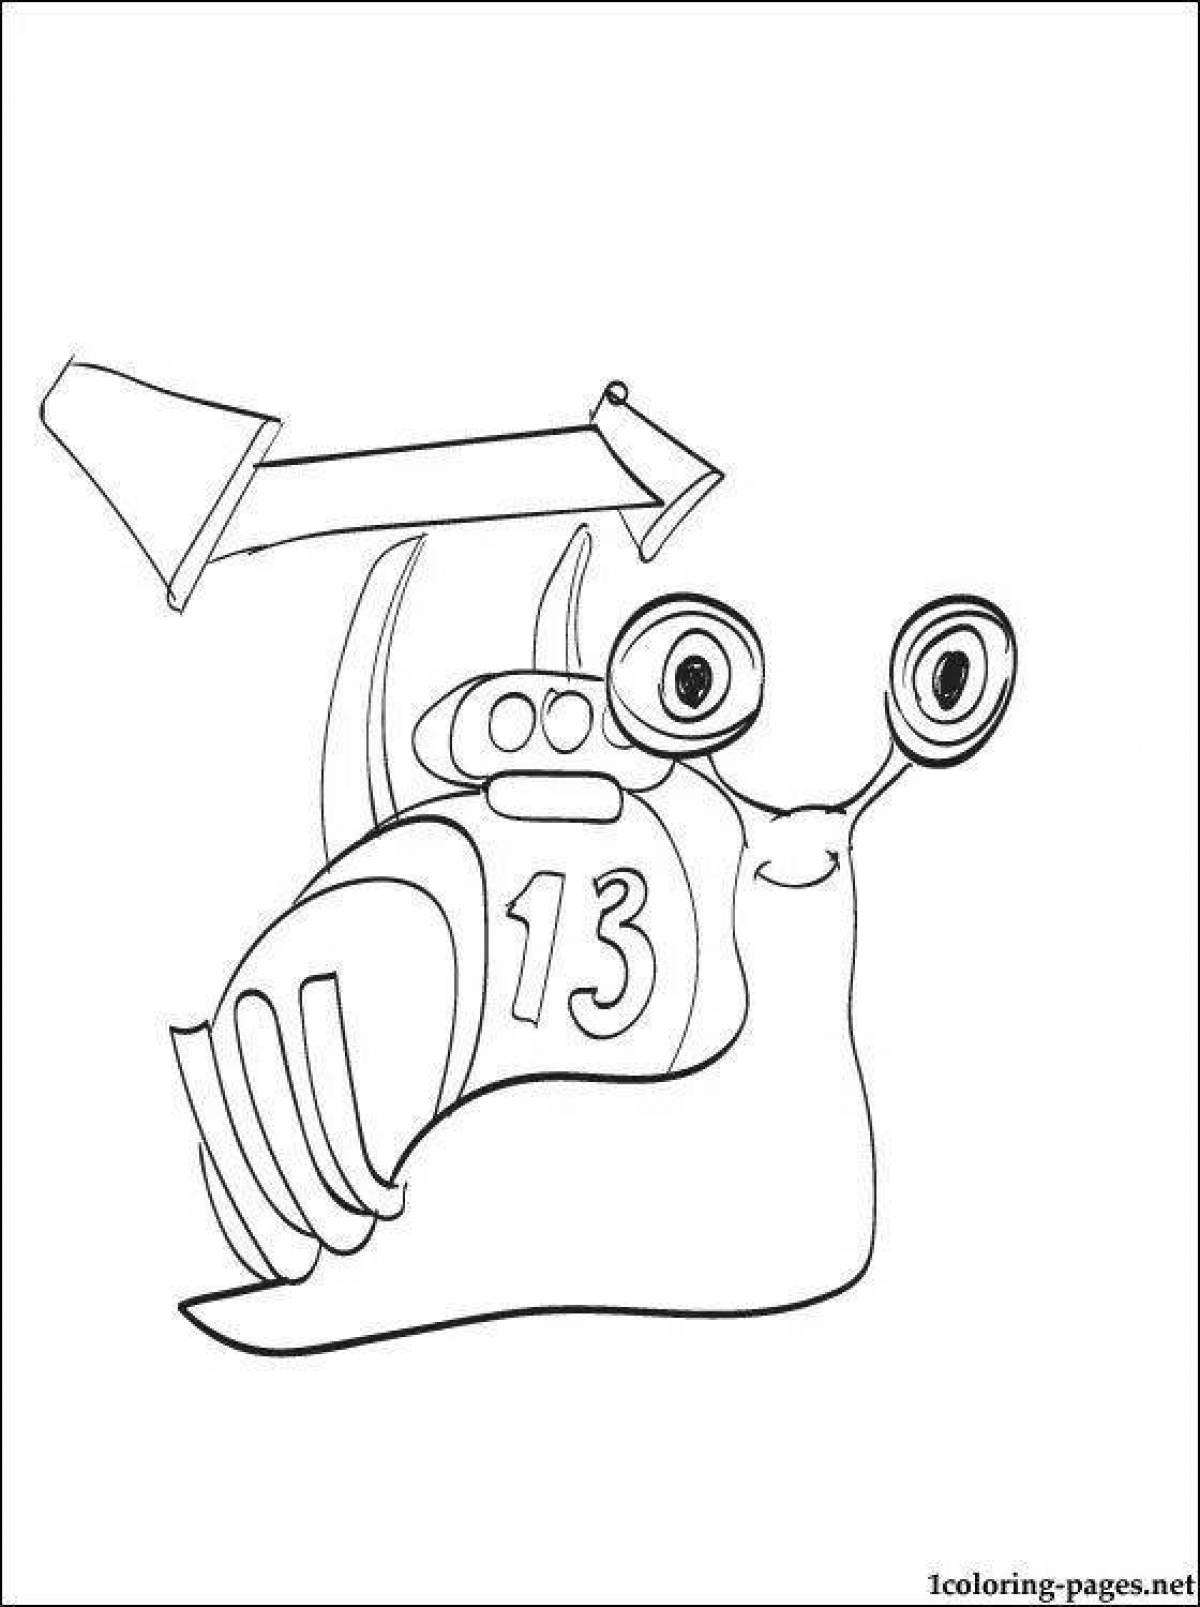 Comic turbo snail coloring page